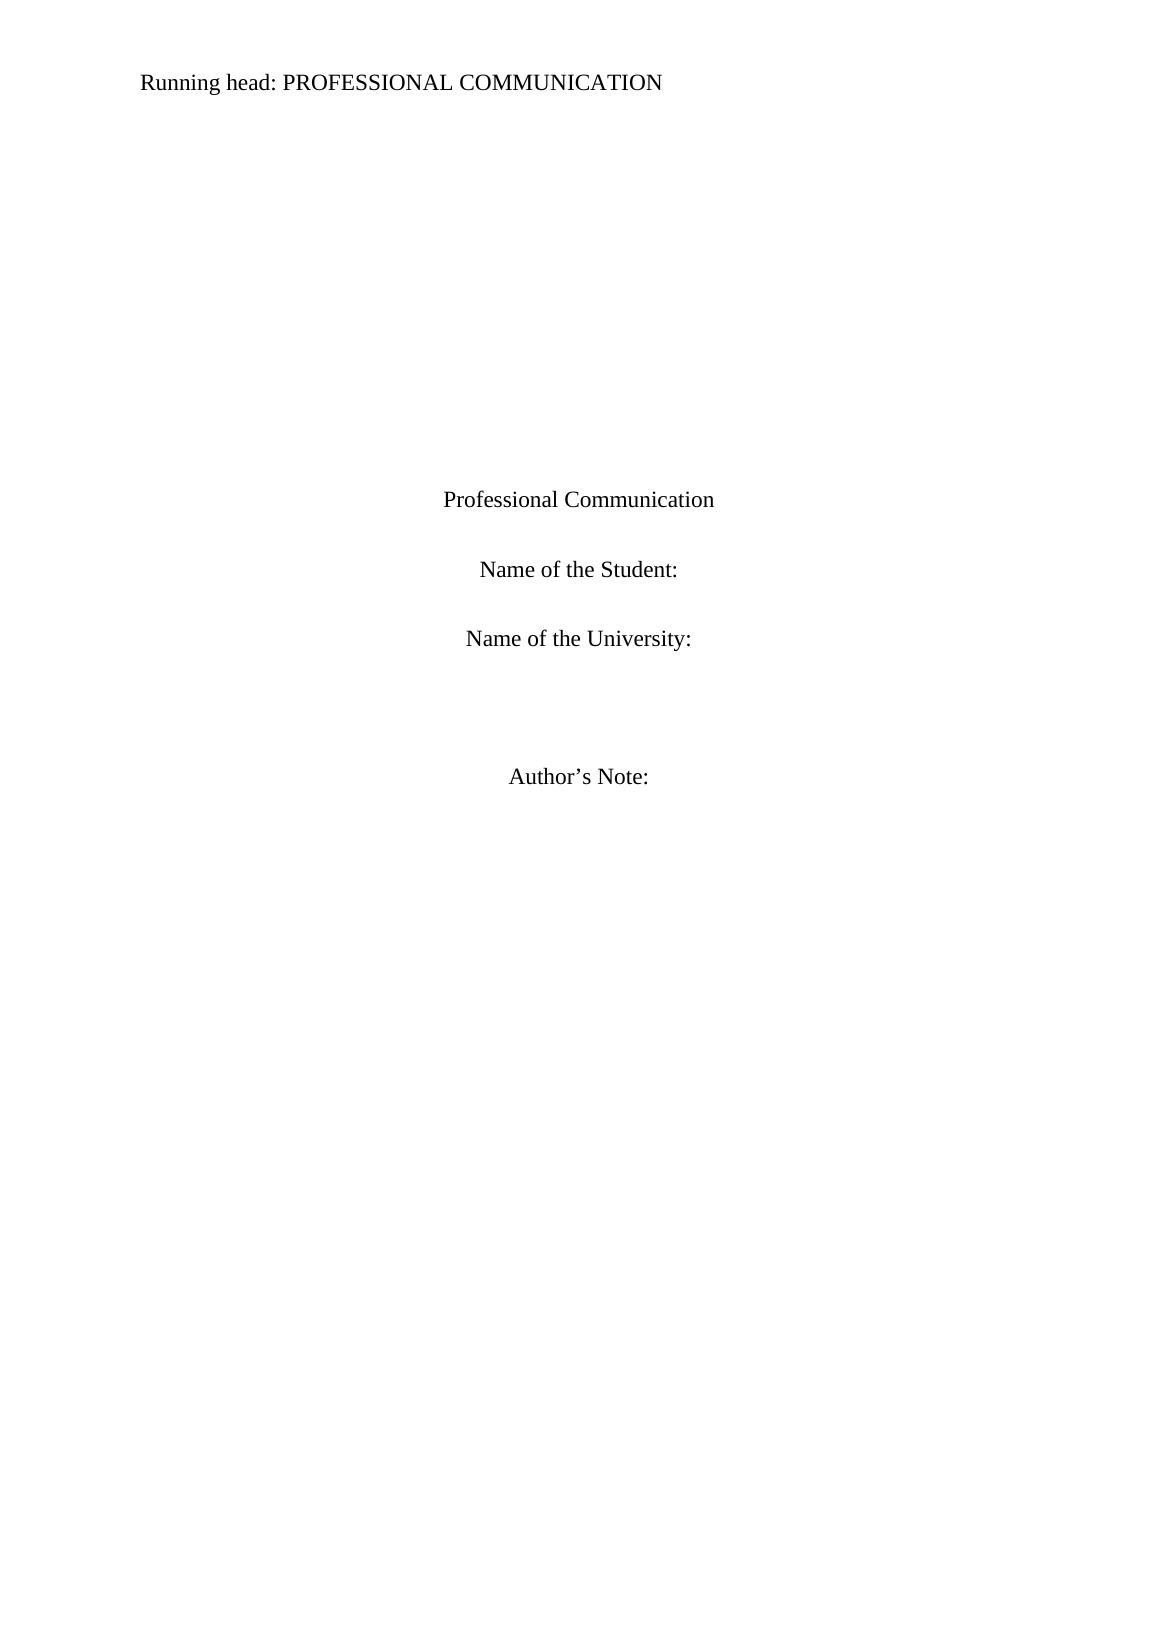 Professional Communication Assignment_1